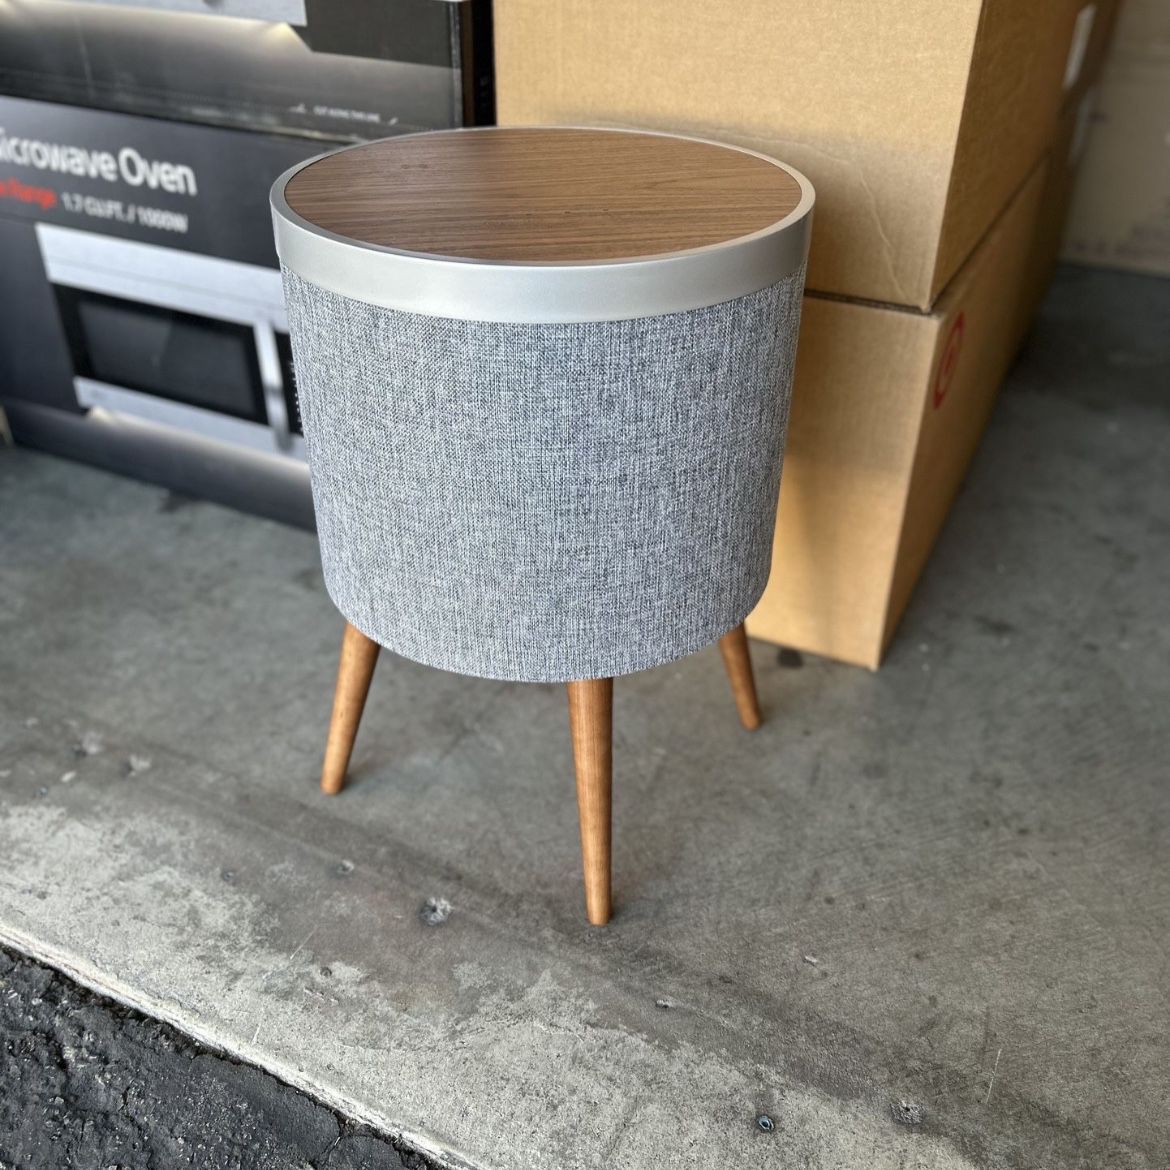 Smart Side Table with Wireless Charging Pad, 360°Speaker, Subwoofer and USB Charging Port